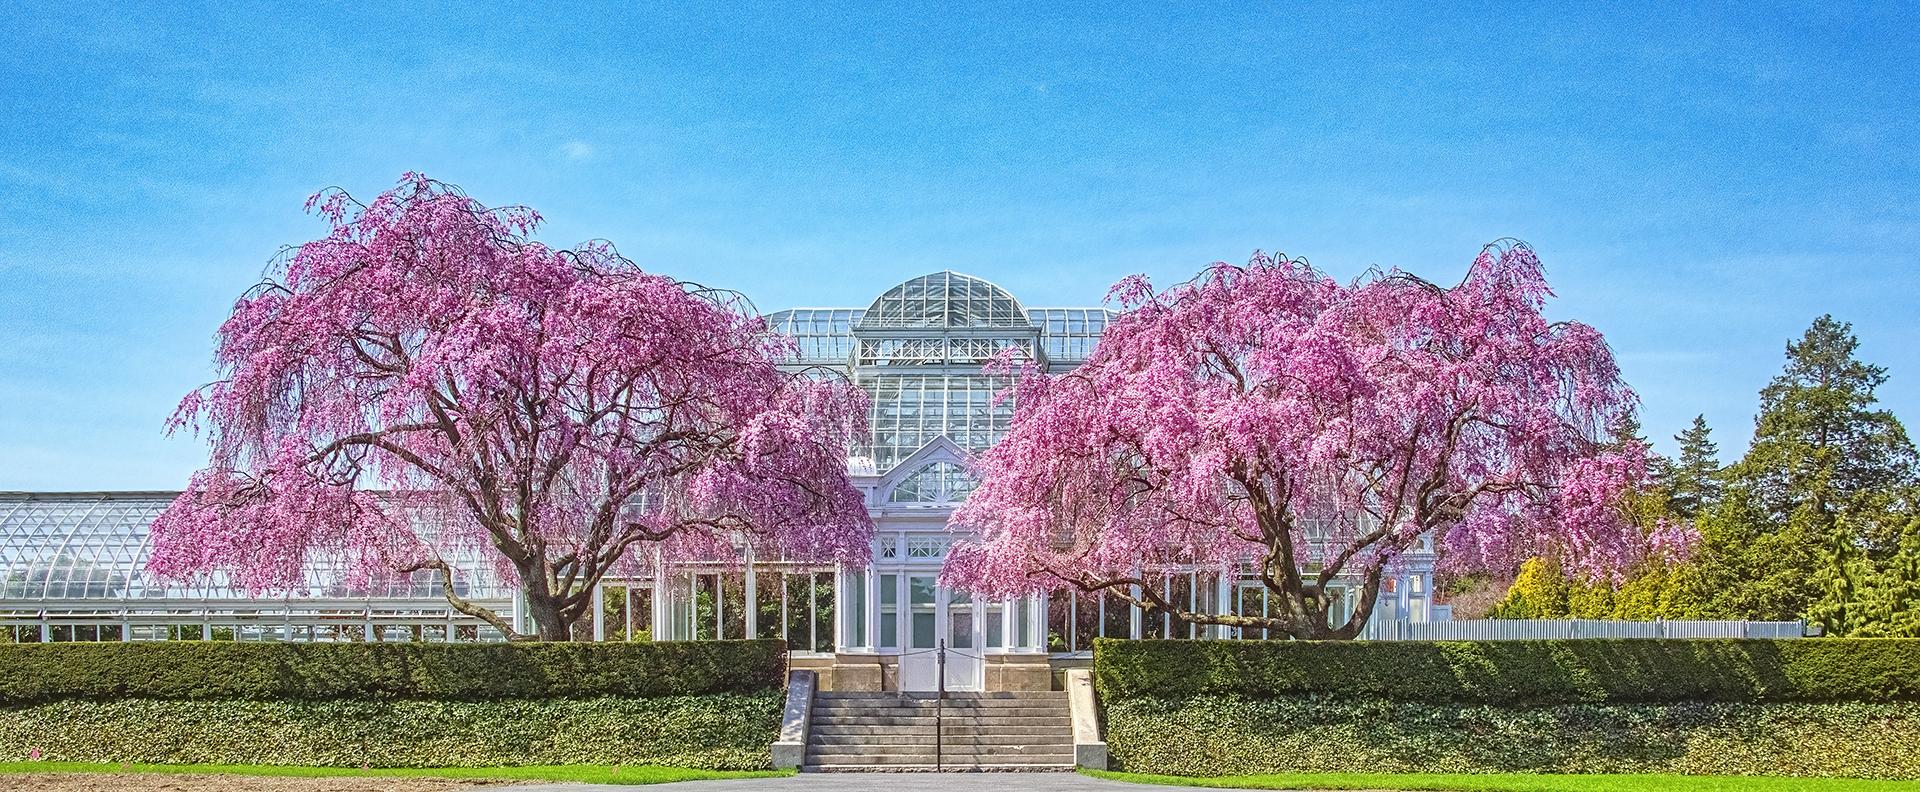 New York Photography Awards Winner - Conservatory on a Bright Spring Day